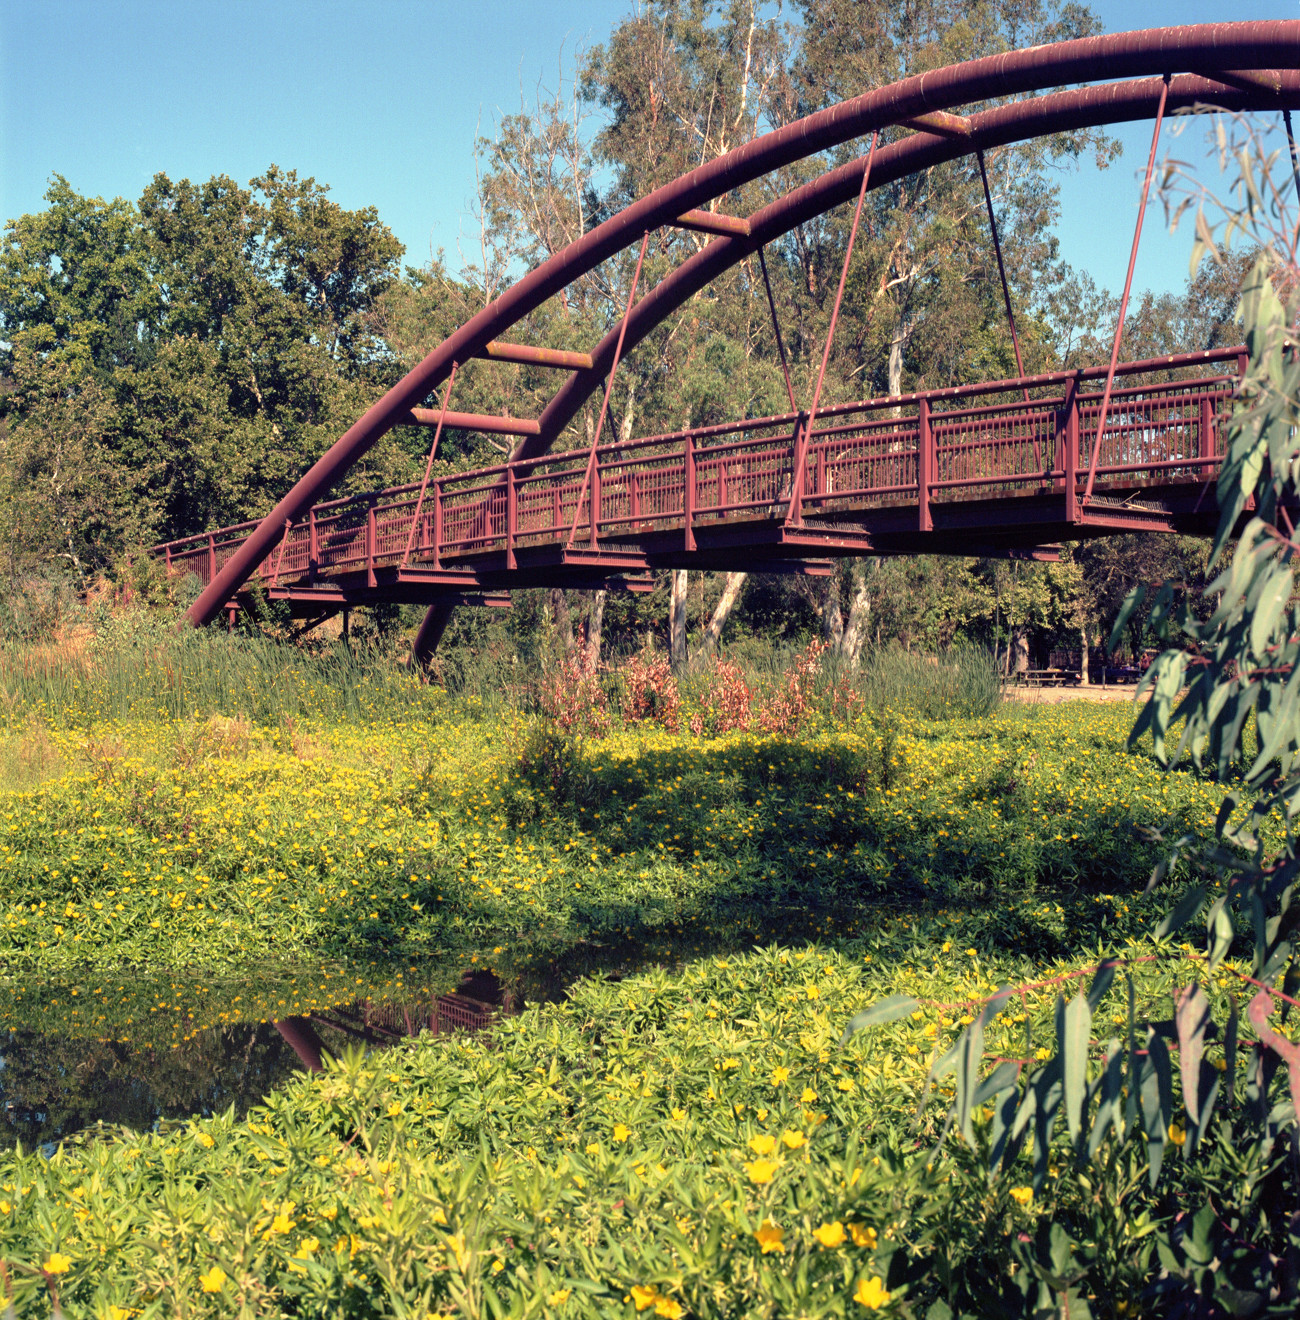 Bridge and wetlands at Vasona Lake Park in July. Here, wetland of green groundcover with little yellow flowers, showing the narrow stream. The bridge seems to be taking off. Background, the forest of the park.